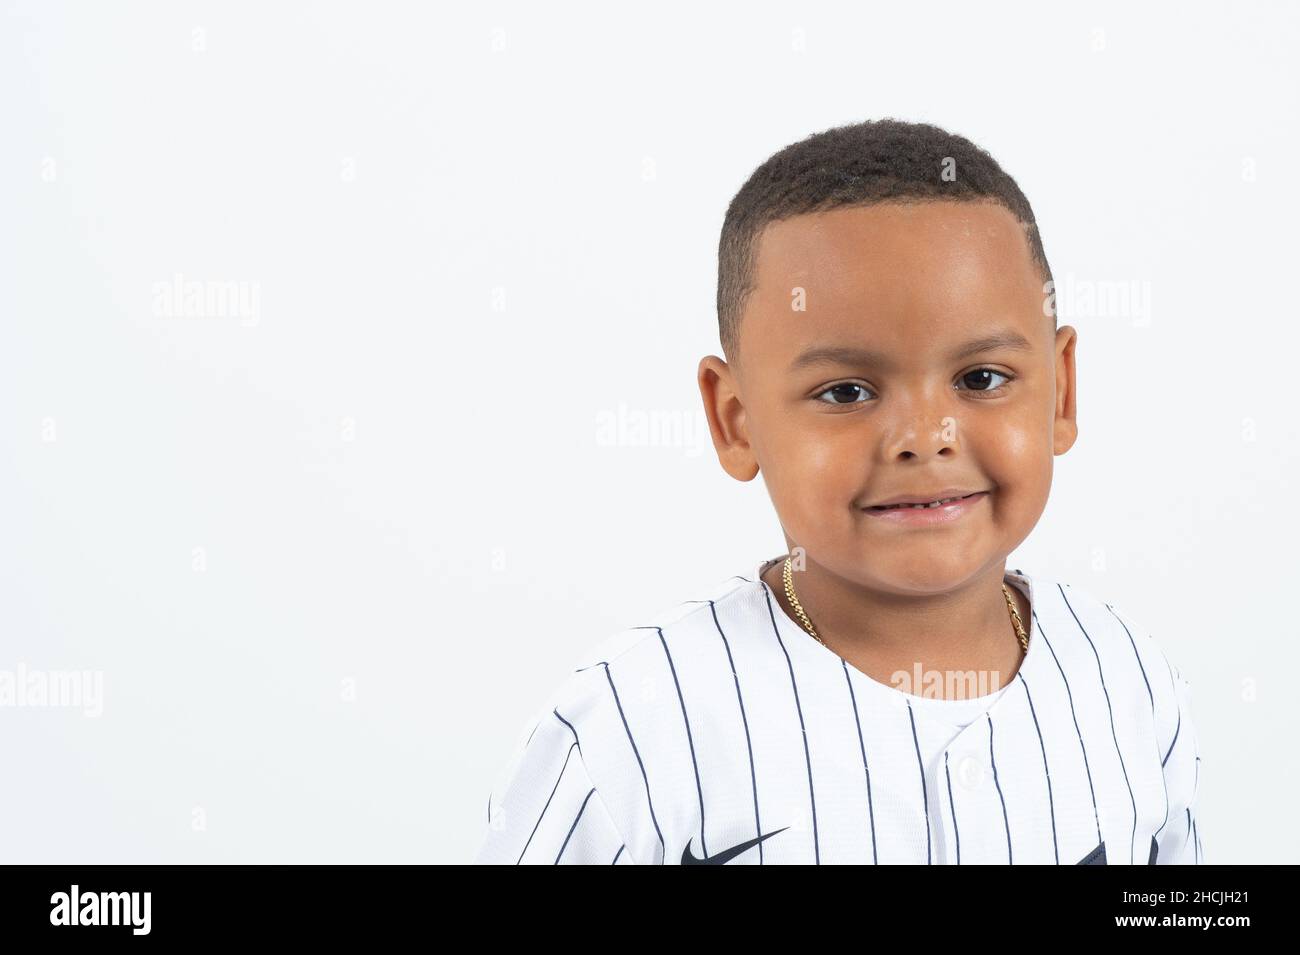 Closeup portrait of 4 or 5 year old boy, smiling, white background Stock Photo